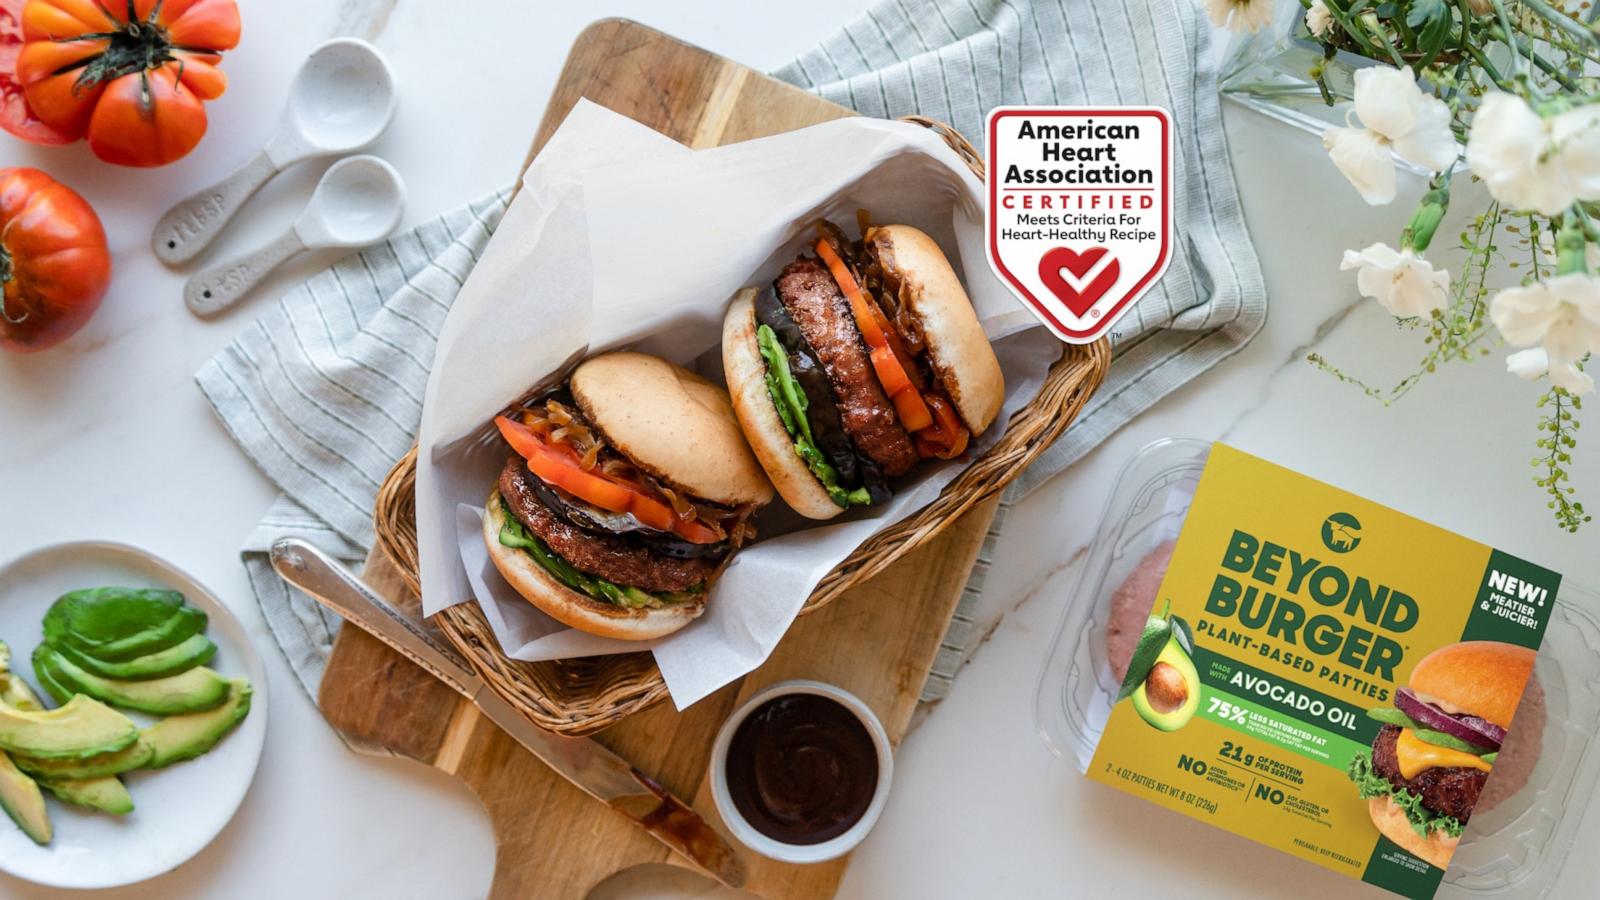 PHOTO: Beyond Meat IV is the brand's latest recipe innovation for its plant-based products, now made with avocado oil.